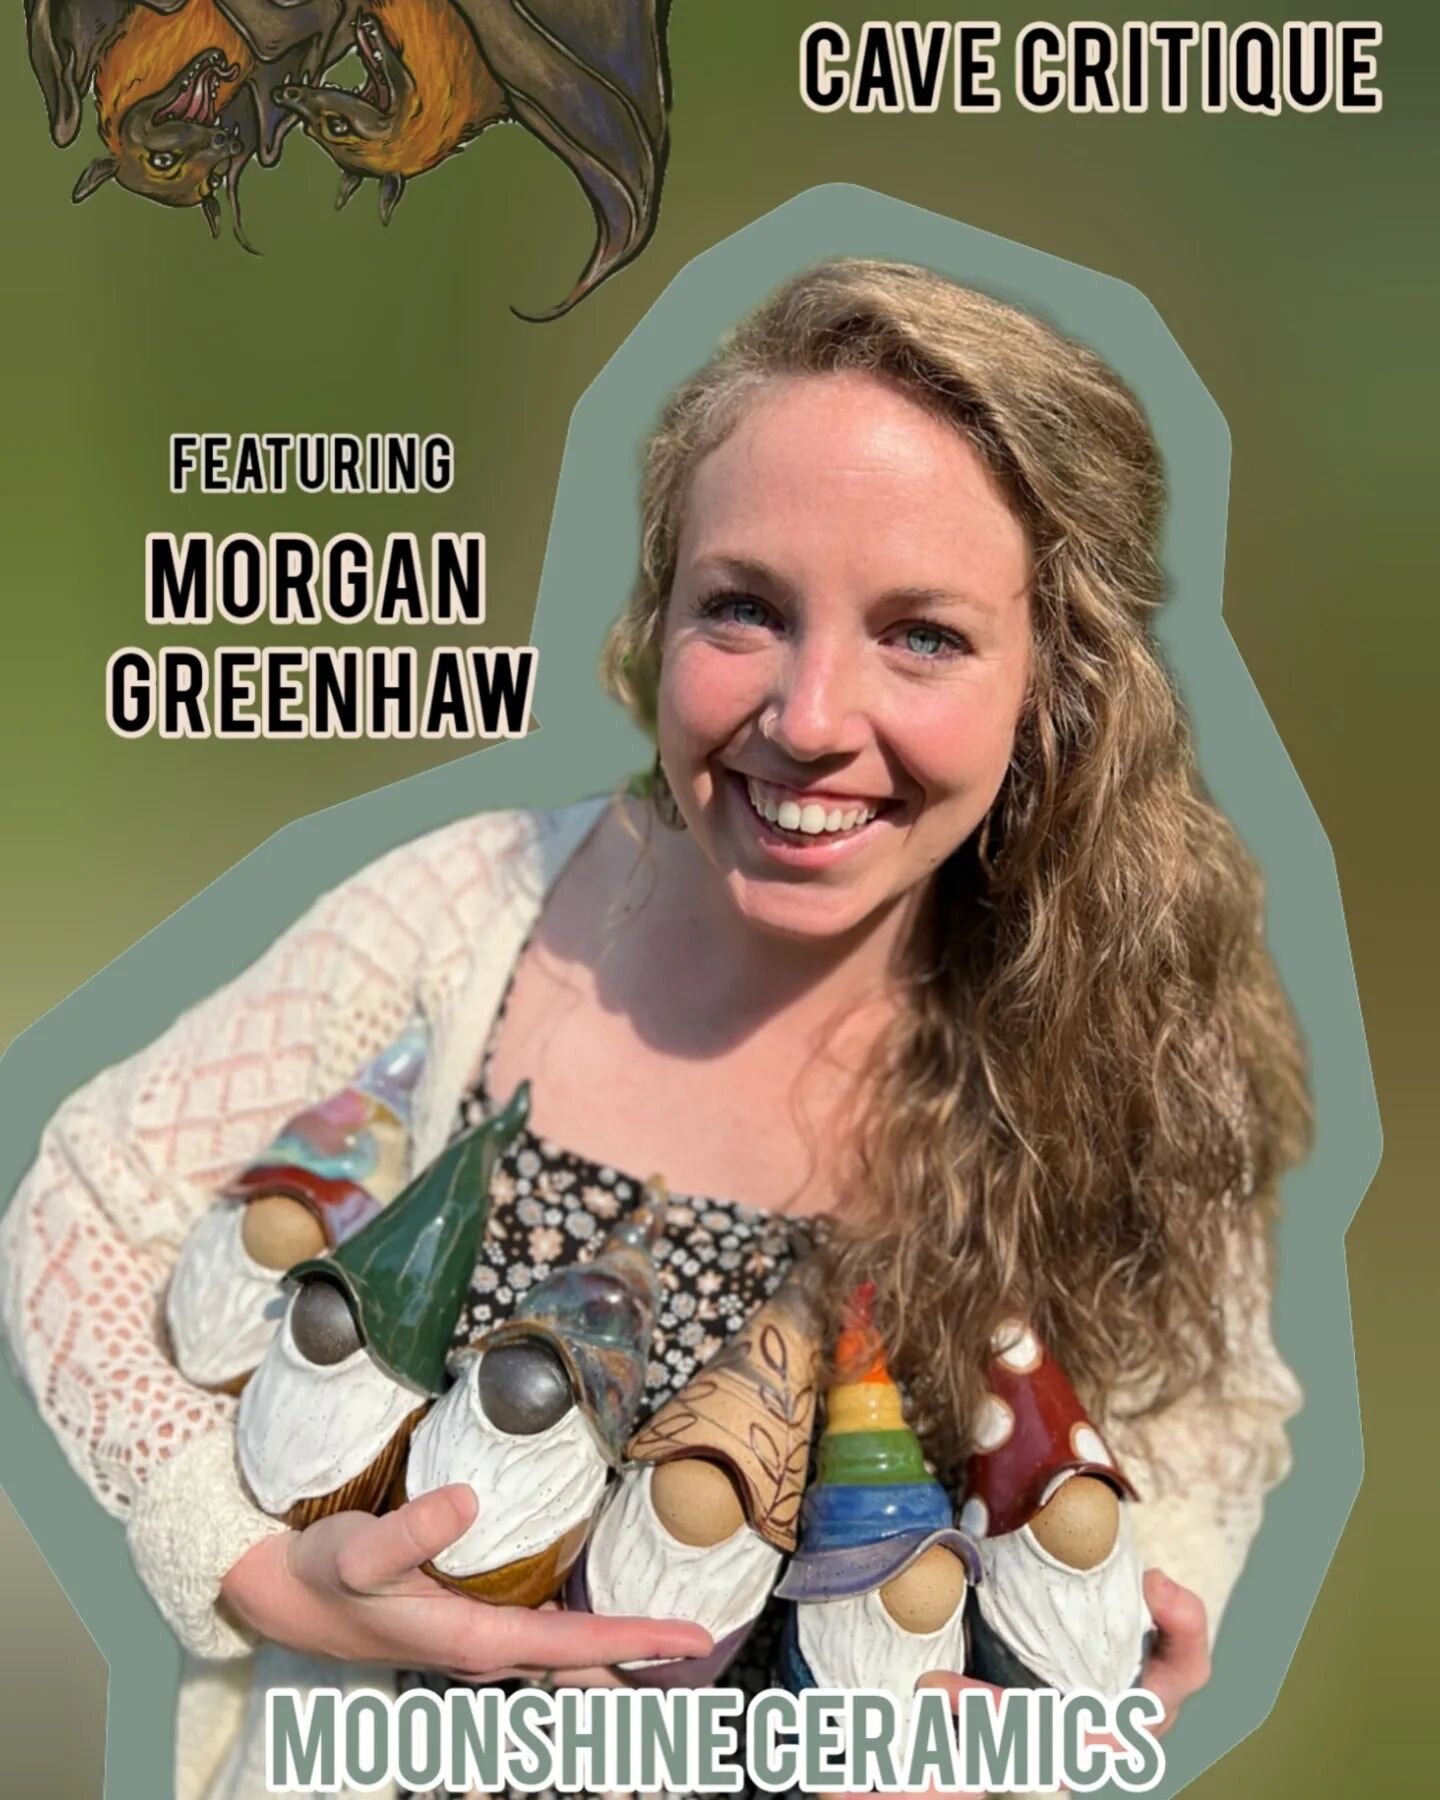 New episode!!! 🌻My first Cave Critique!! 

Each Cave Critique I'll have an artist who I've been blessed by purchasing their work to discuss their creation process and inspiration. 

On this episode, I'm joined by Morgan Greenhaw, aka @moonshineceram